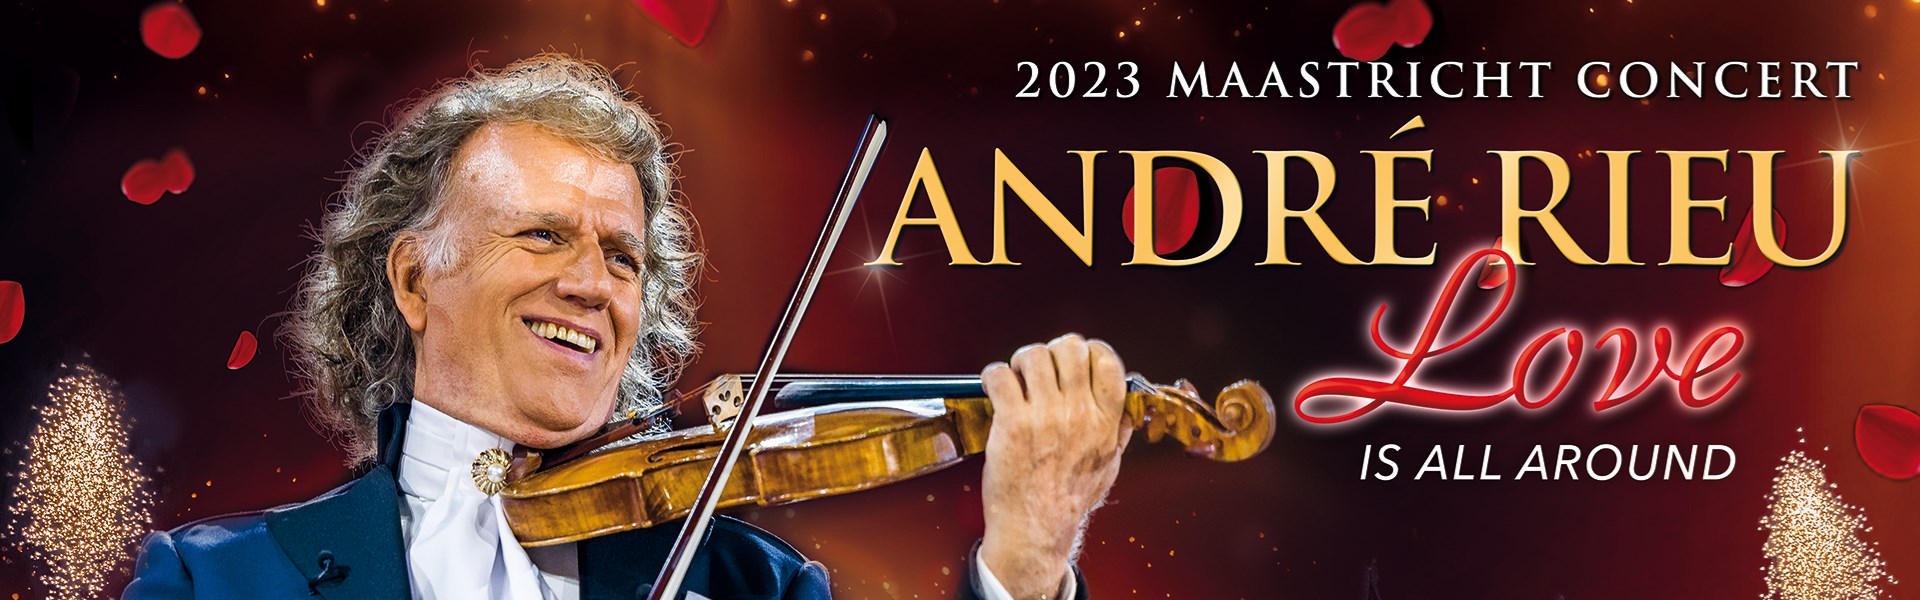 André Rieu's 2023 Maastricht Concert: Love Is All Around (Live Recording)